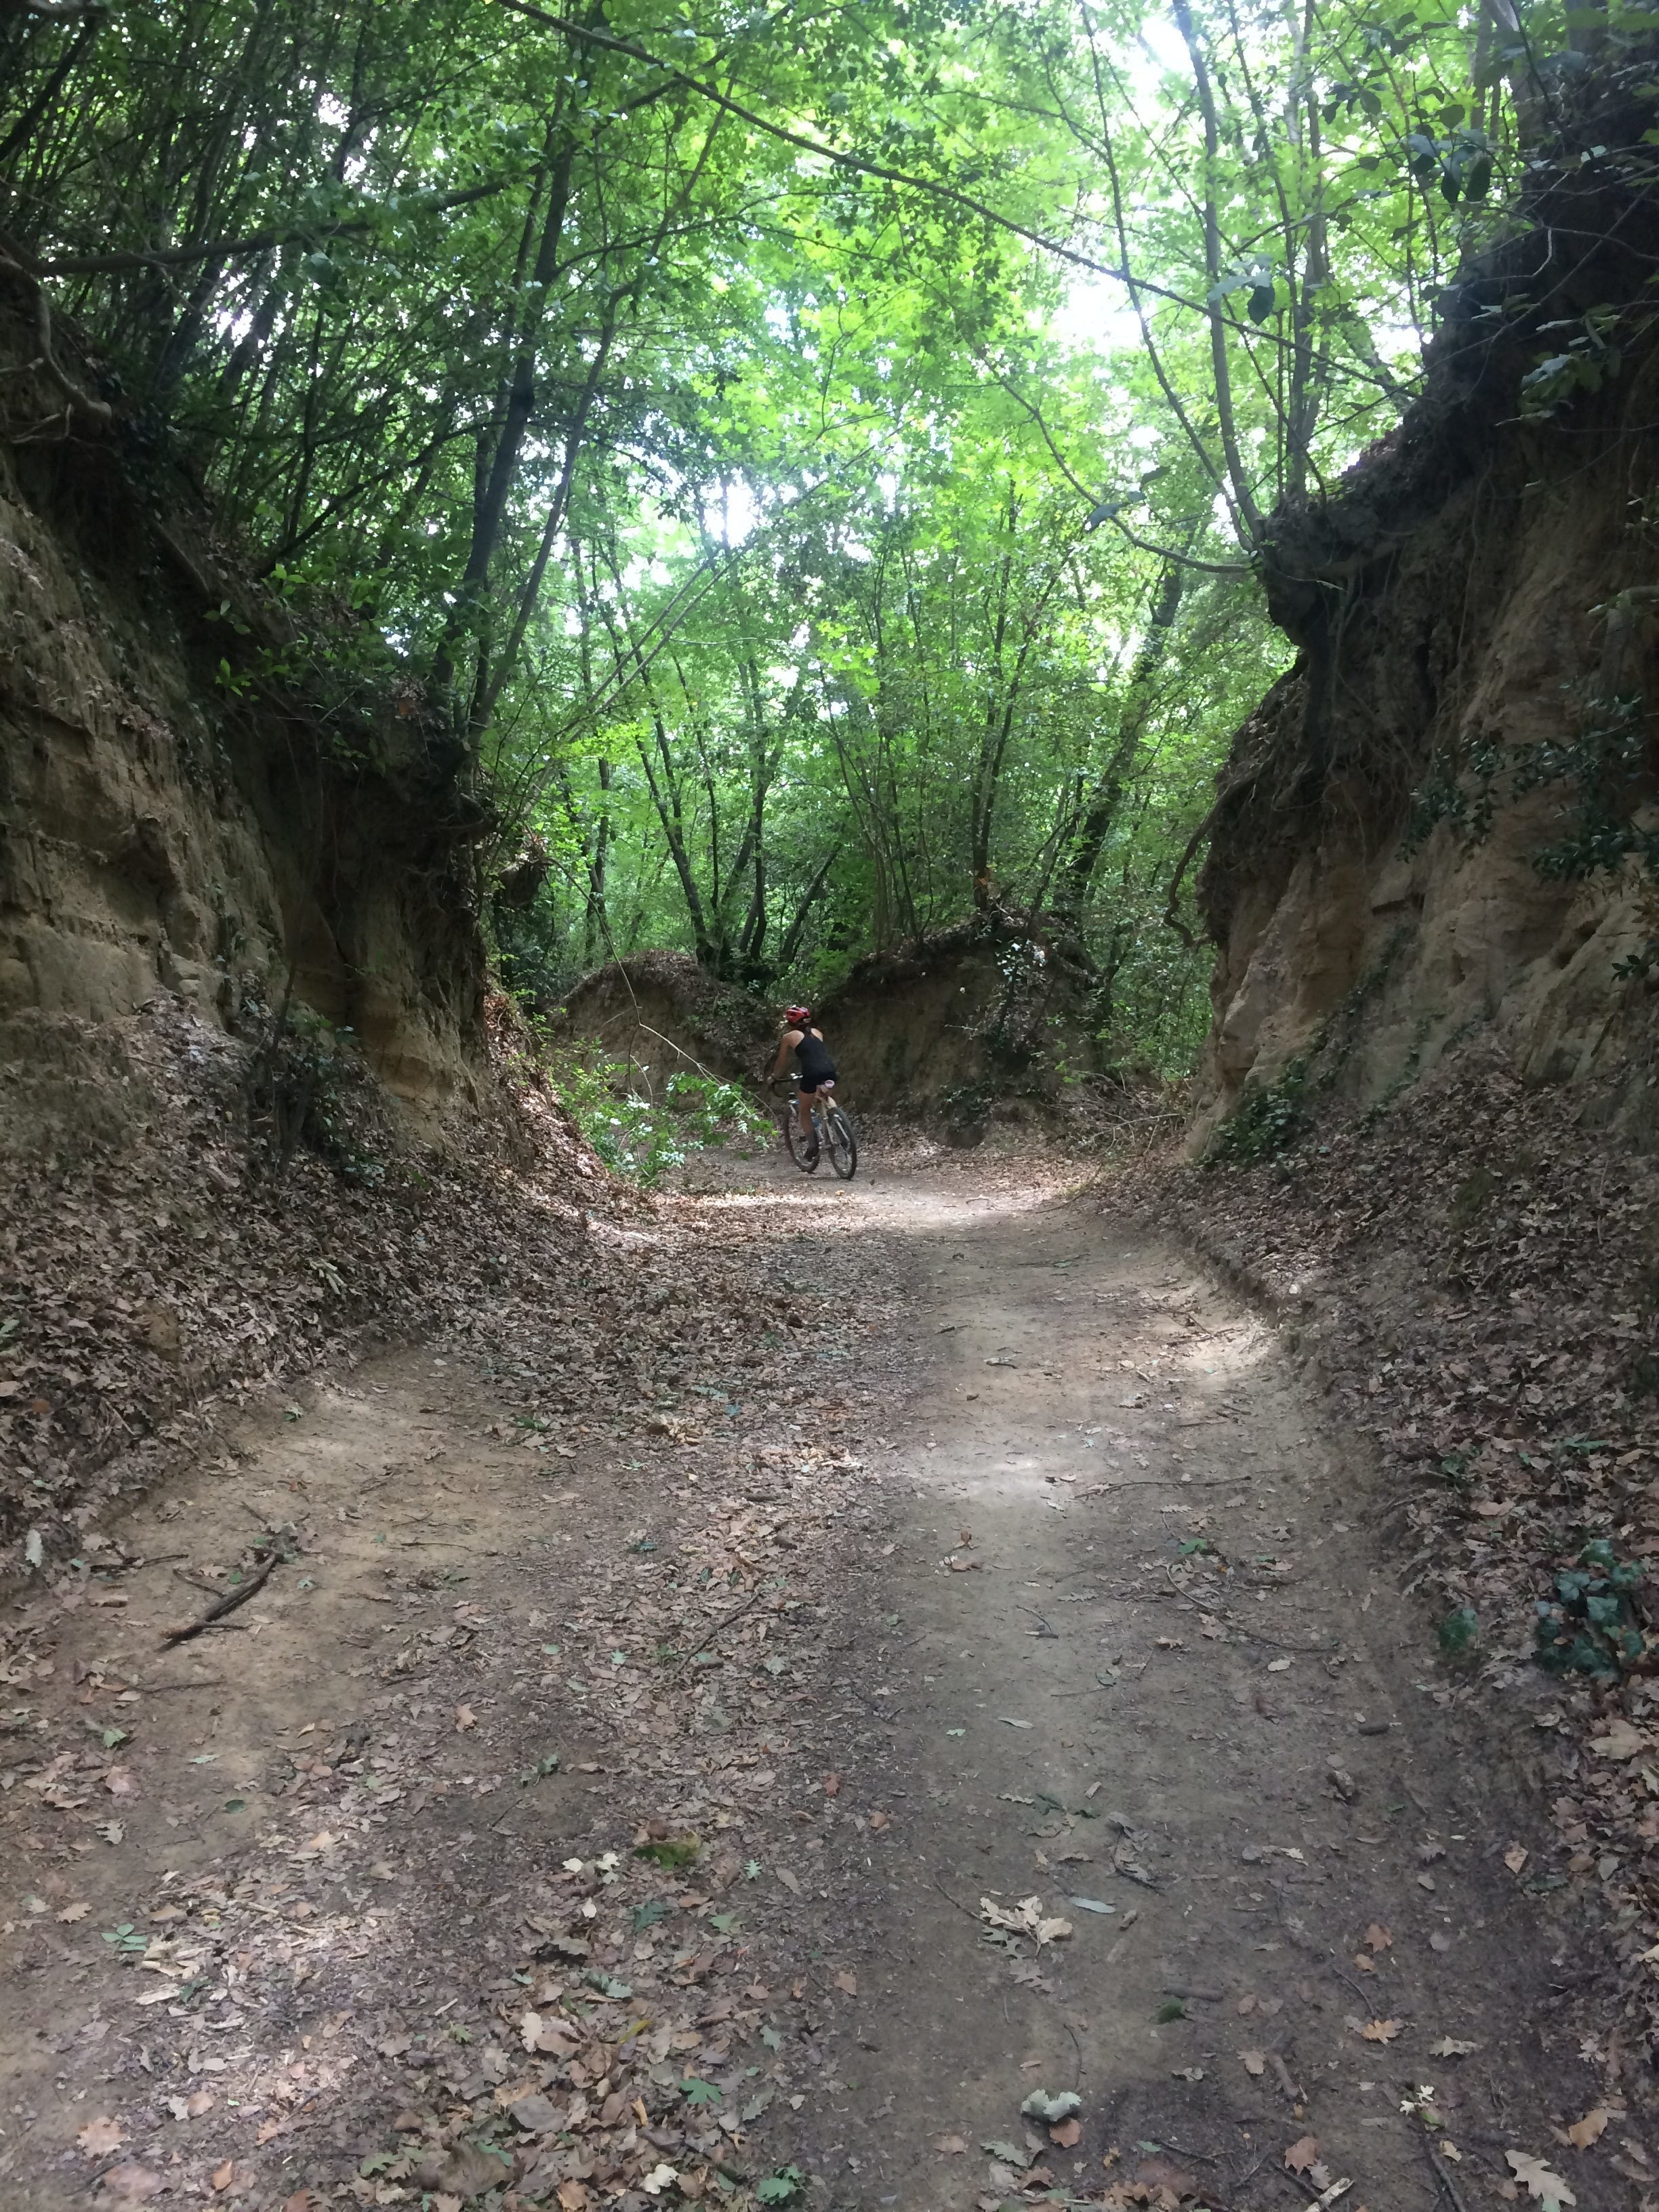 Bicycling on the Via Francigena - sustainable tourism in Tuscany